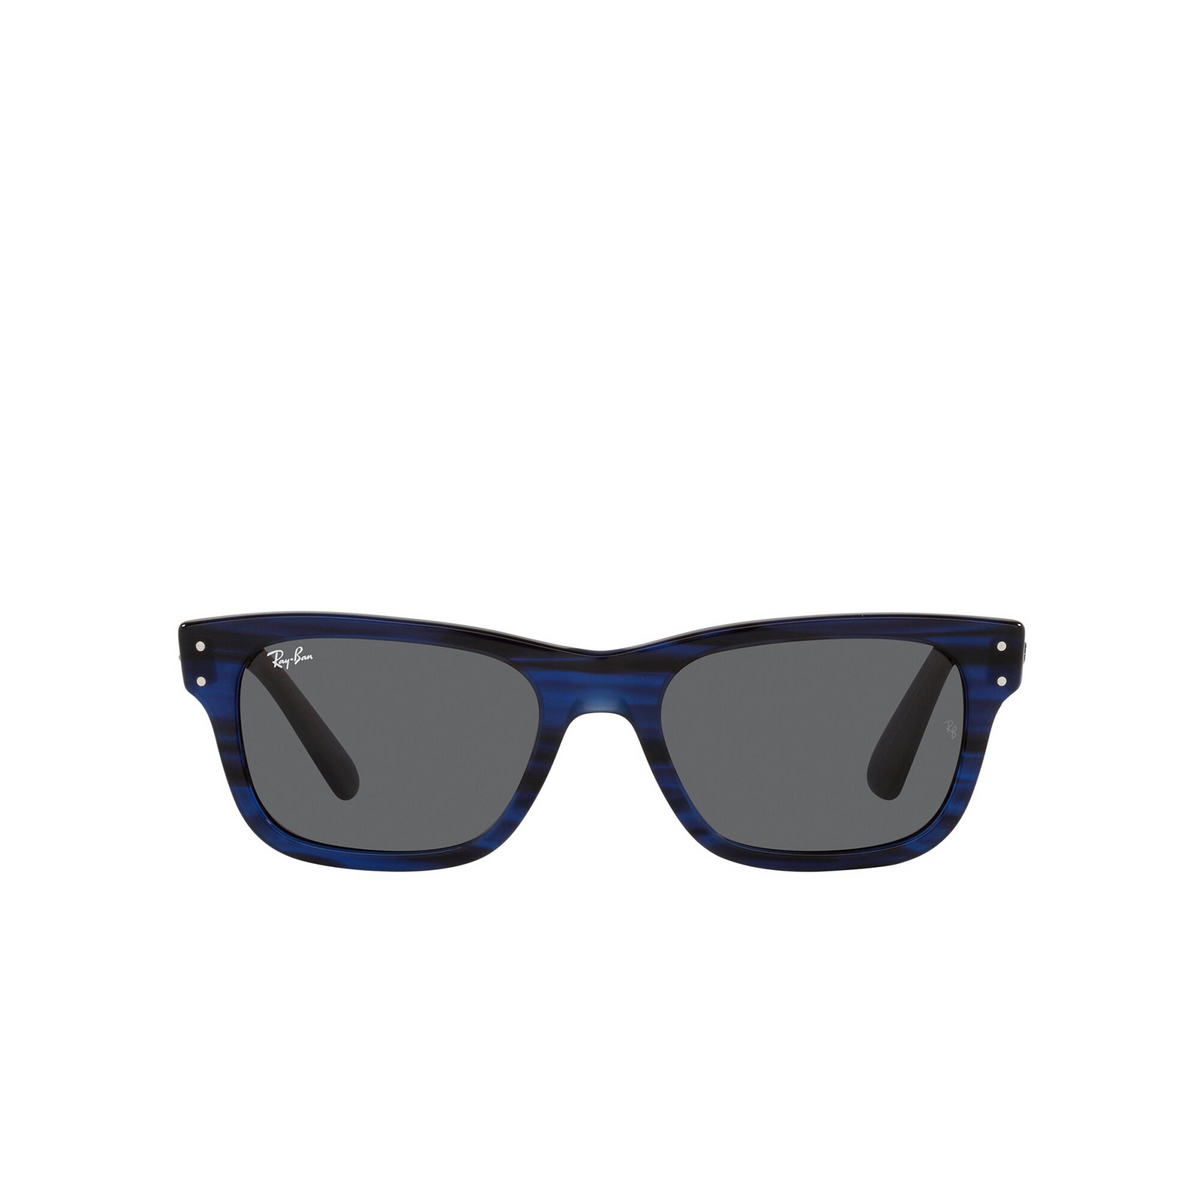 Ray-Ban MR BURBANK Sunglasses 1339B1 Striped Blue - front view